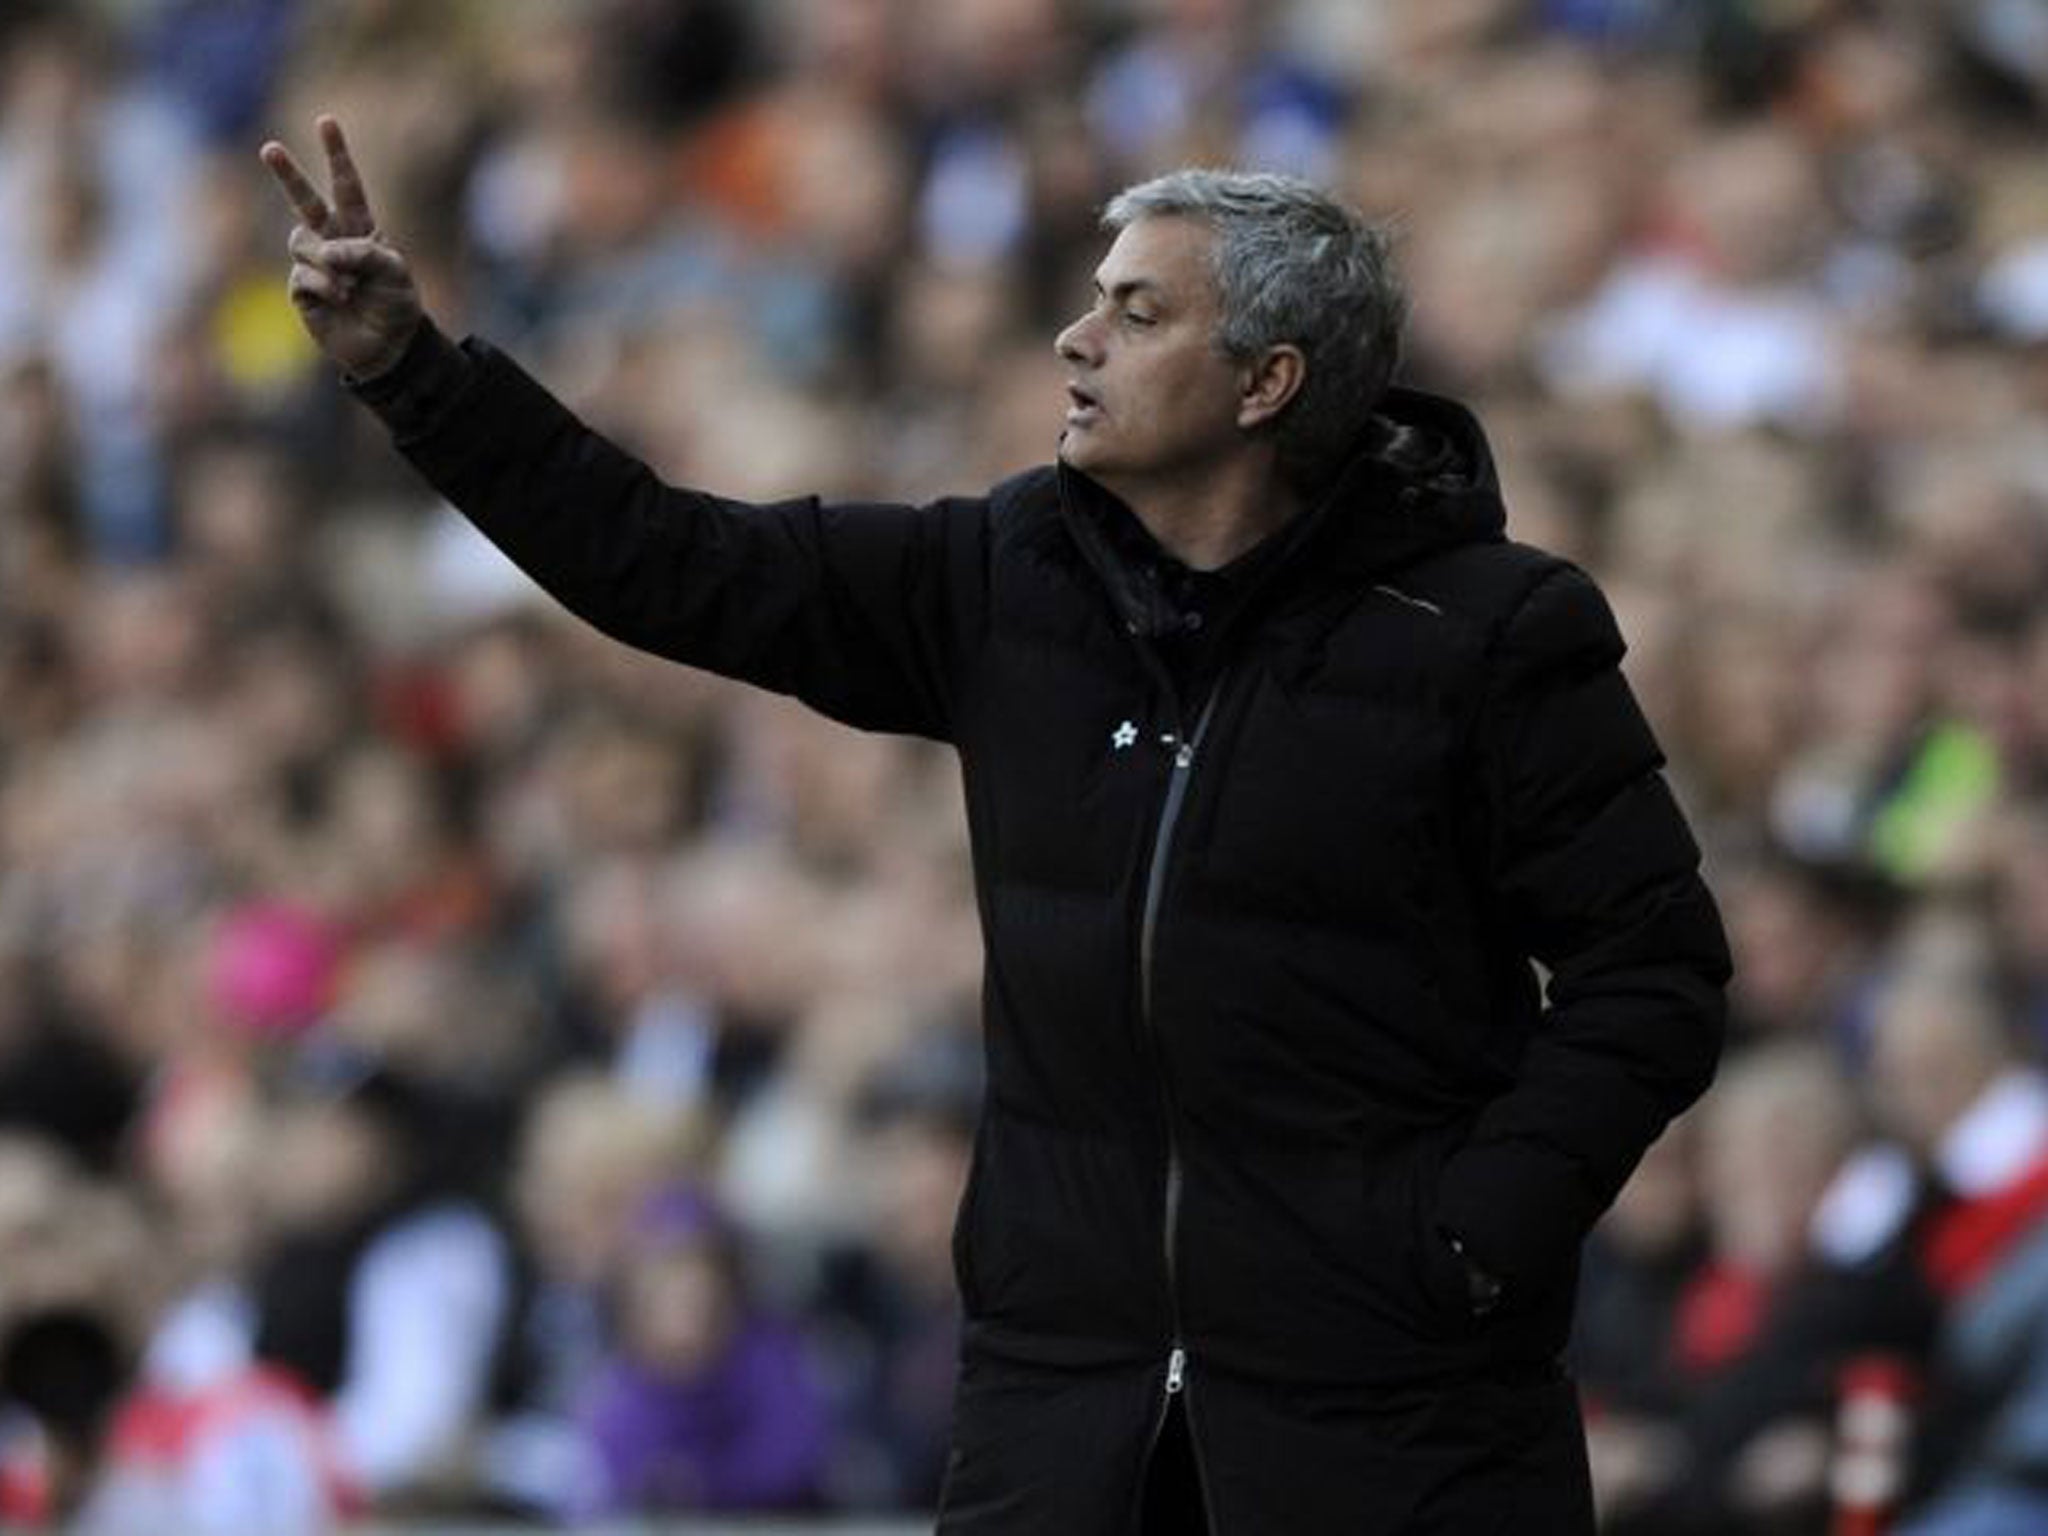 Chelsea manager Jose Mourinho makes a gesture from the touchline